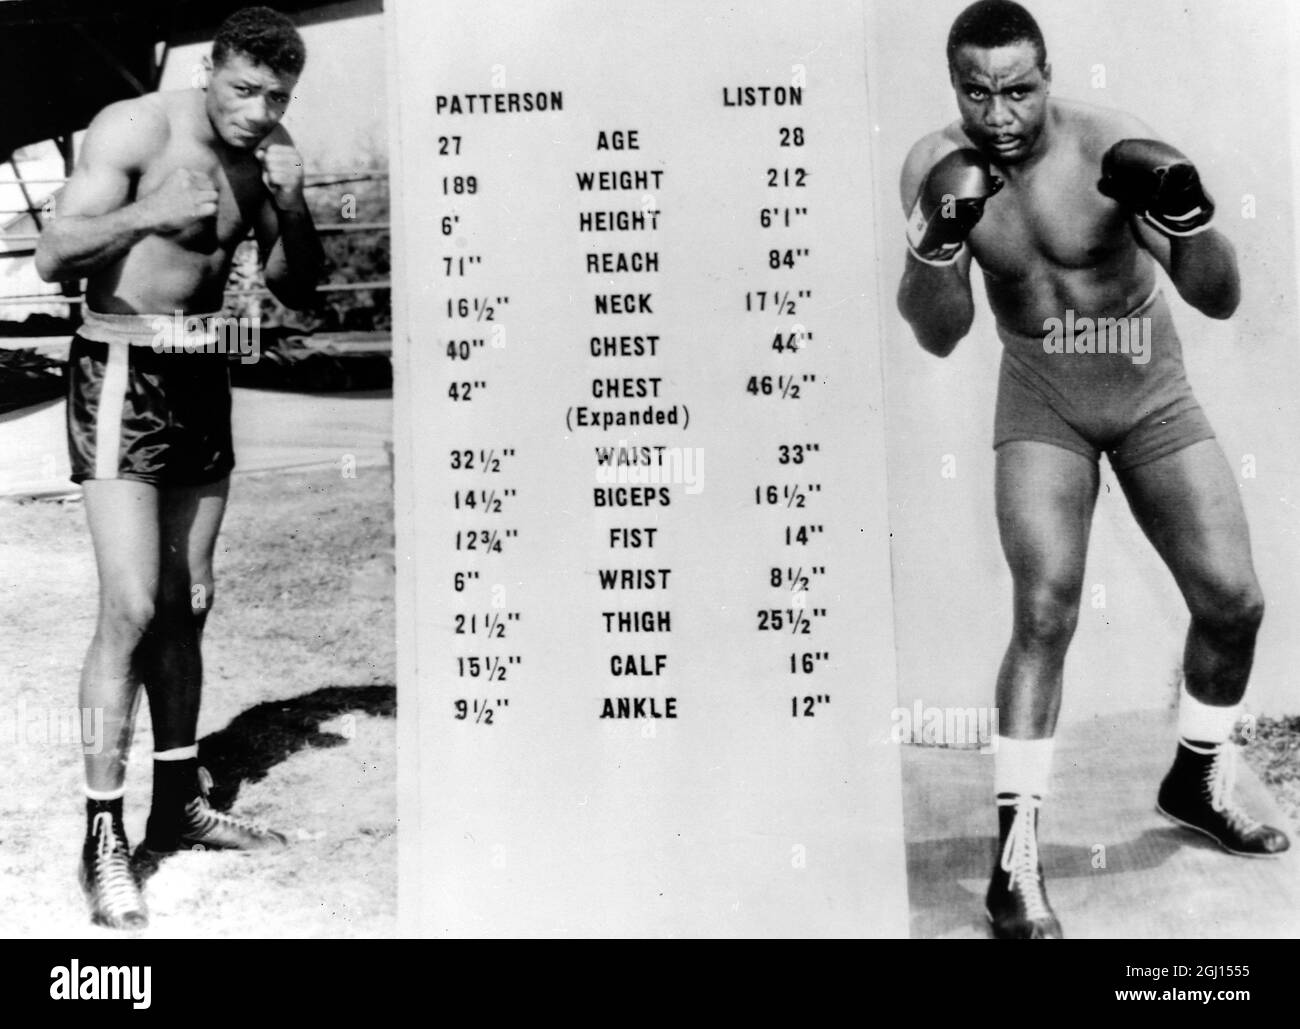 BOXERS FLOYD PATTERSON AND SONNY LISTON ; 22 SEPTEMBER 1962 Stock Photo